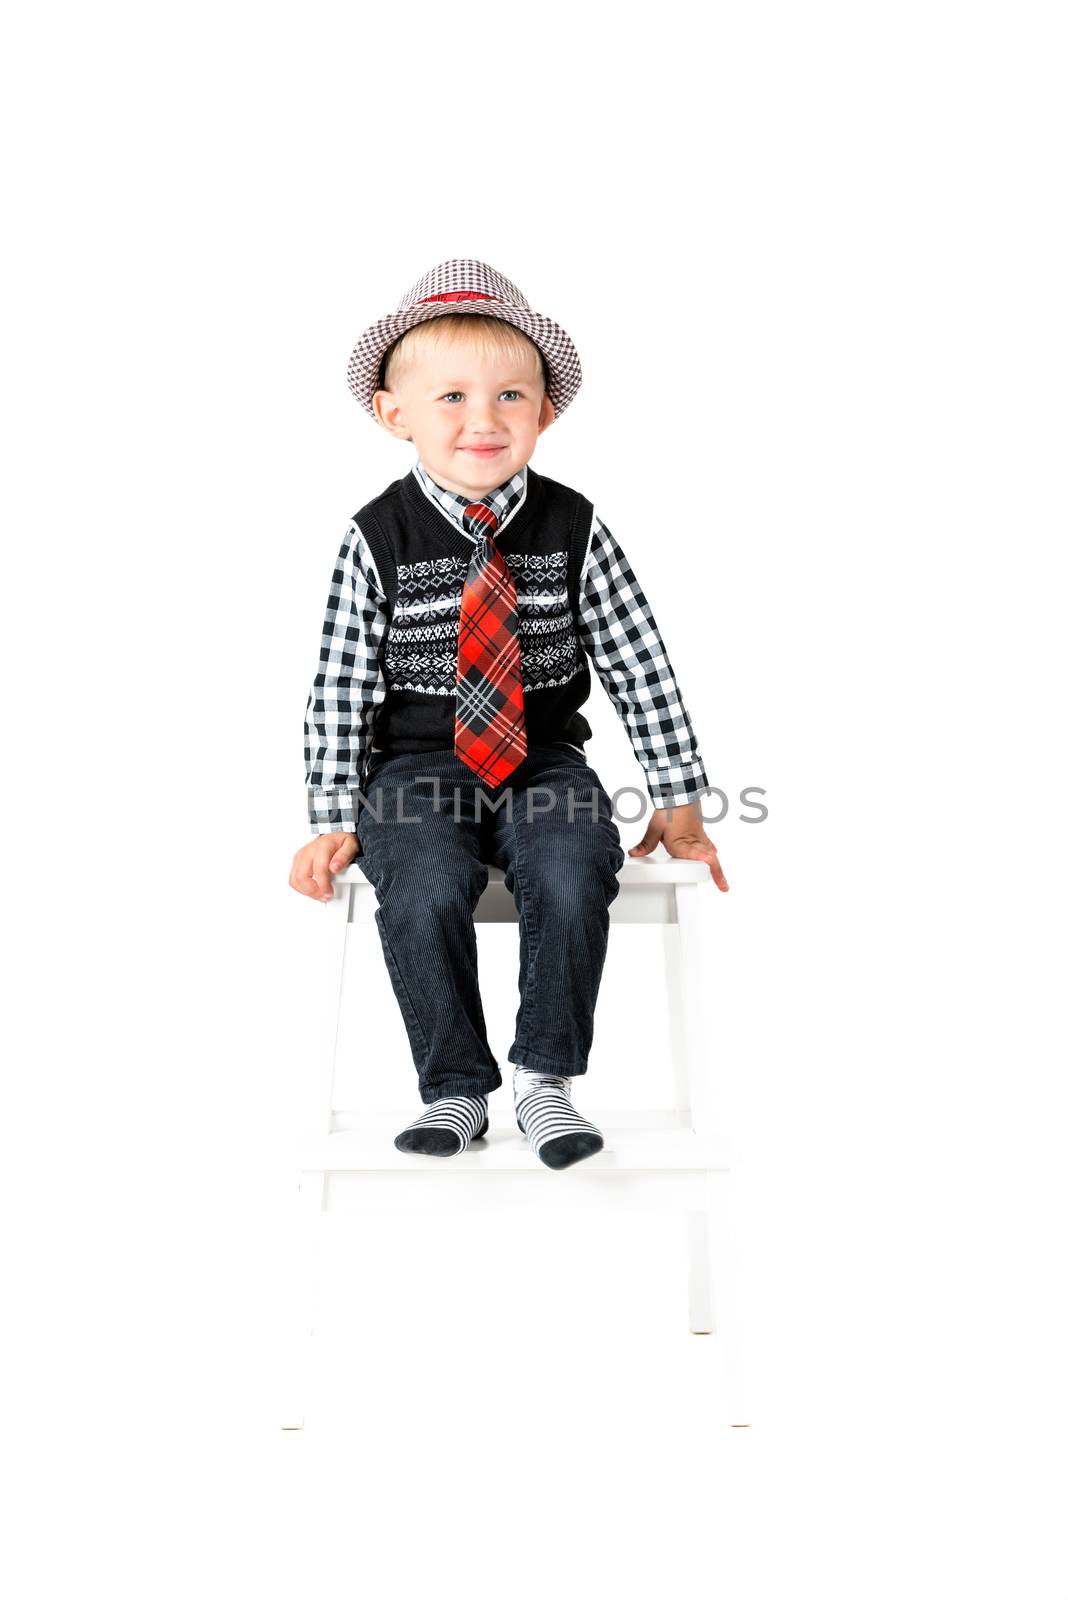 Smiling happy boy with tie and hat shot in the studio on a white background